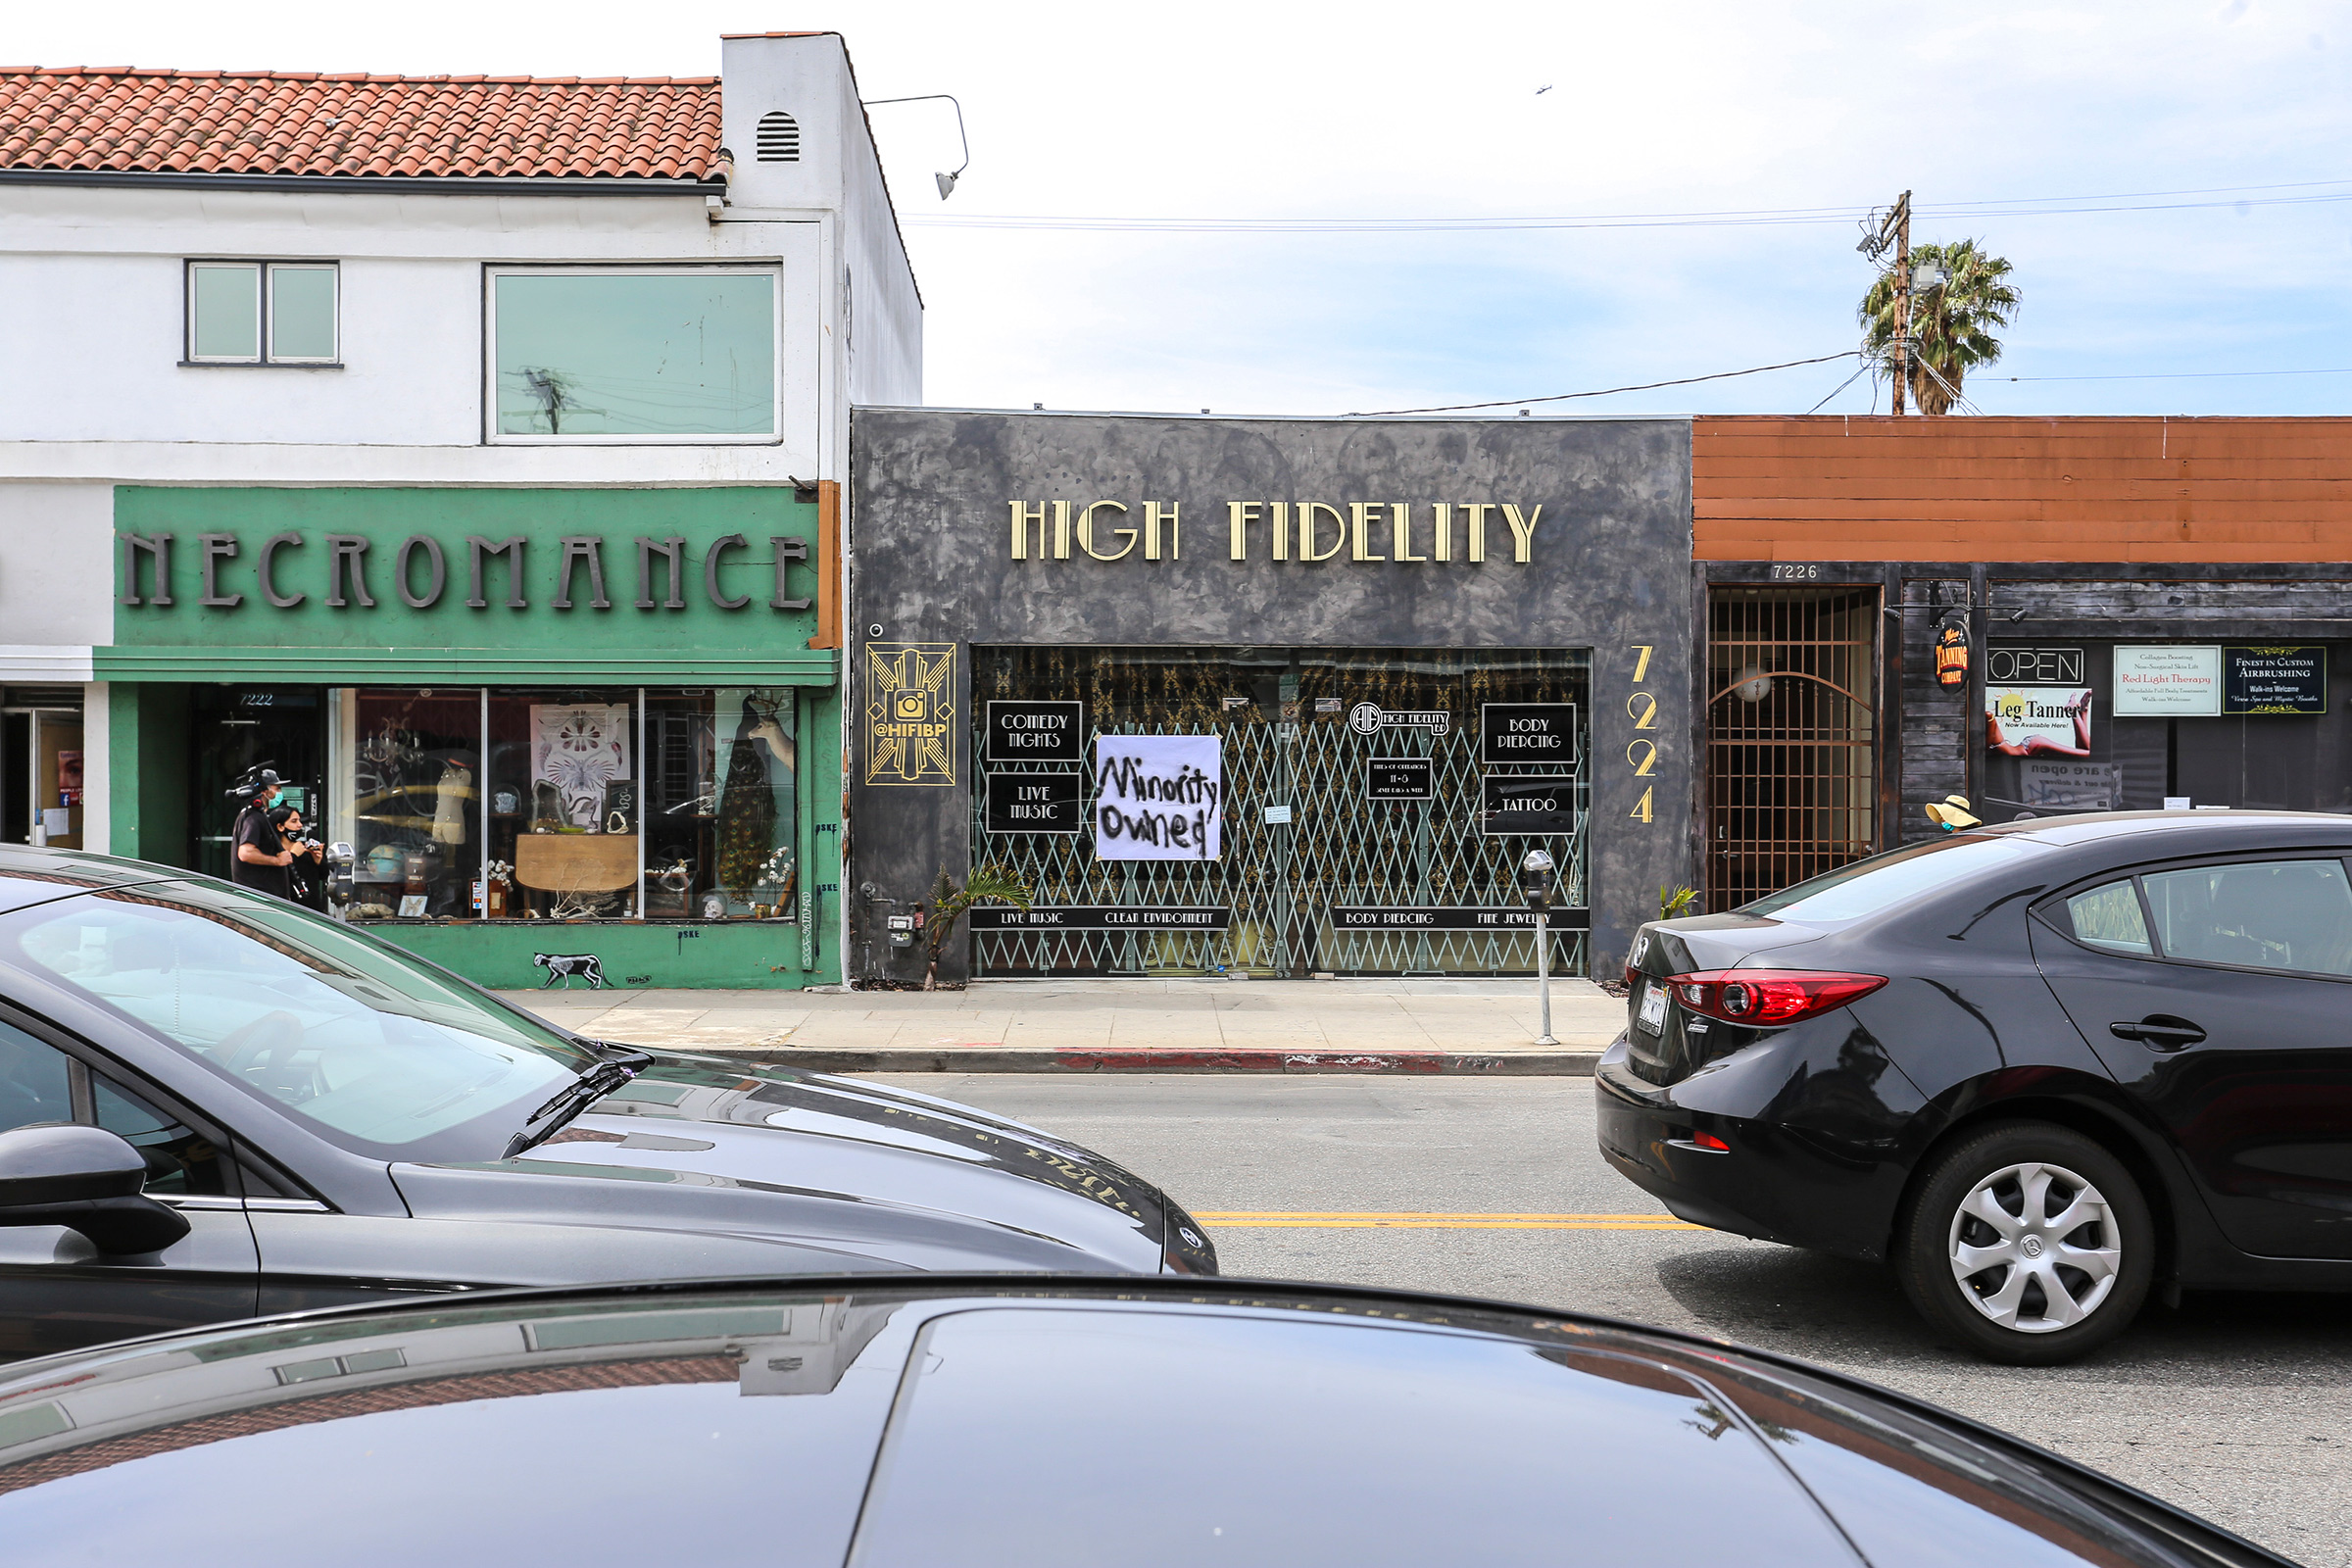 High Fidelity, a black owned business on Melrose Avenue, Los Angeles, displays a "Minority Owned" sign on May 31 (Desmond A. Hester—Sipa USA)